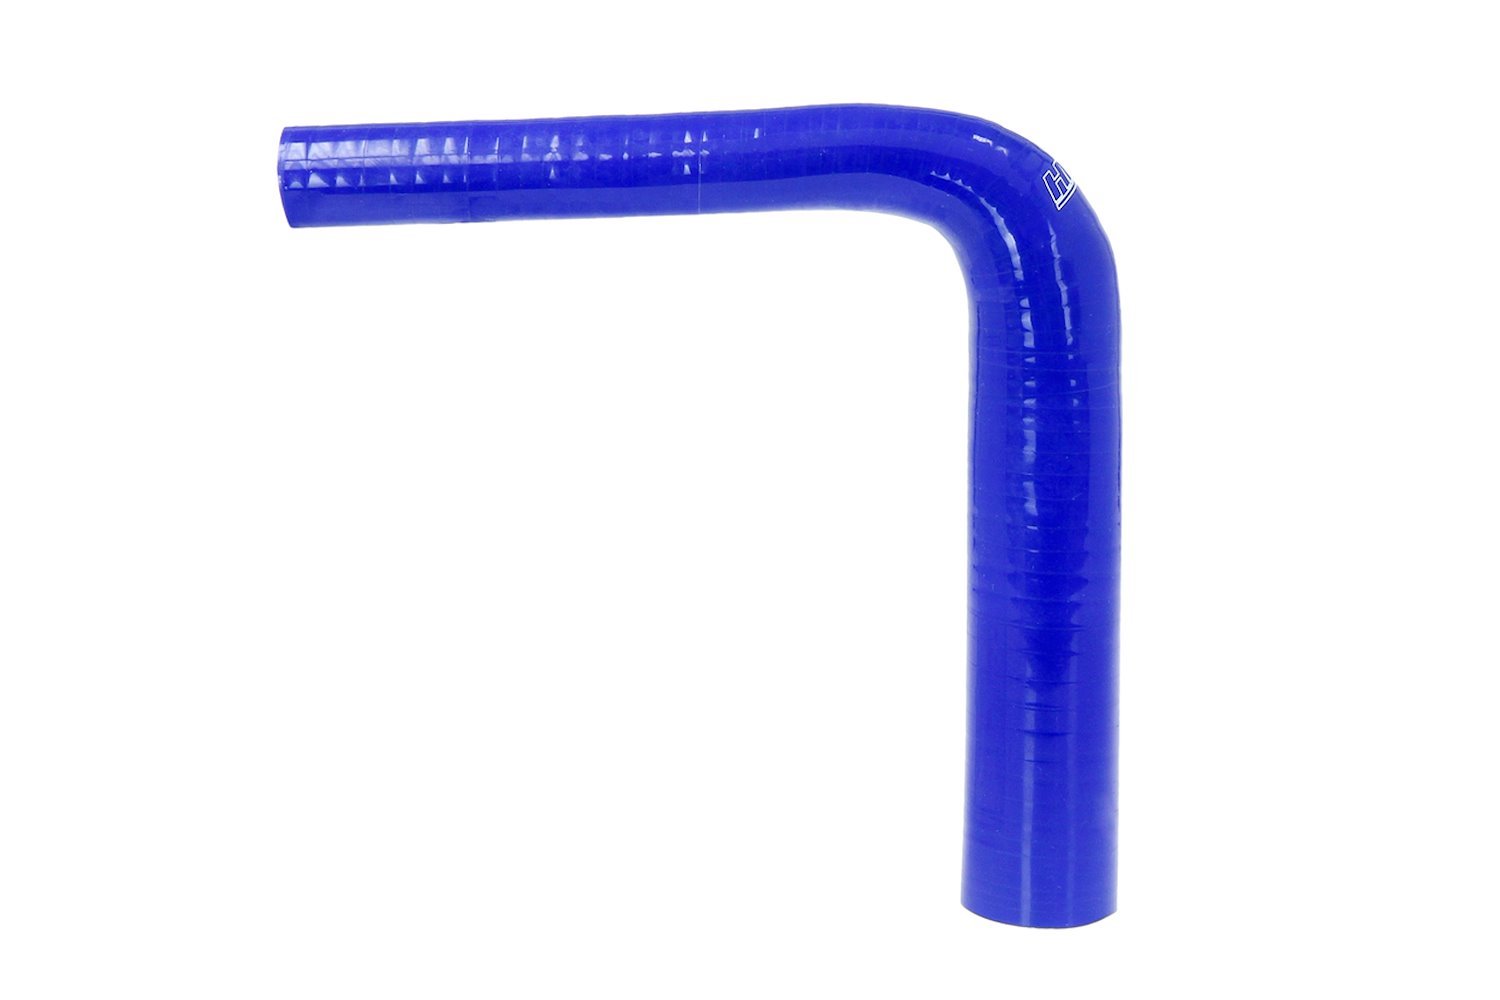 HTSER90-150-250-BLUE Silicone 90-Degree Elbow Hose, High-Temp 4-Ply Reinforced, 1-1/2 in. - 2-1/2 in. ID, Blue